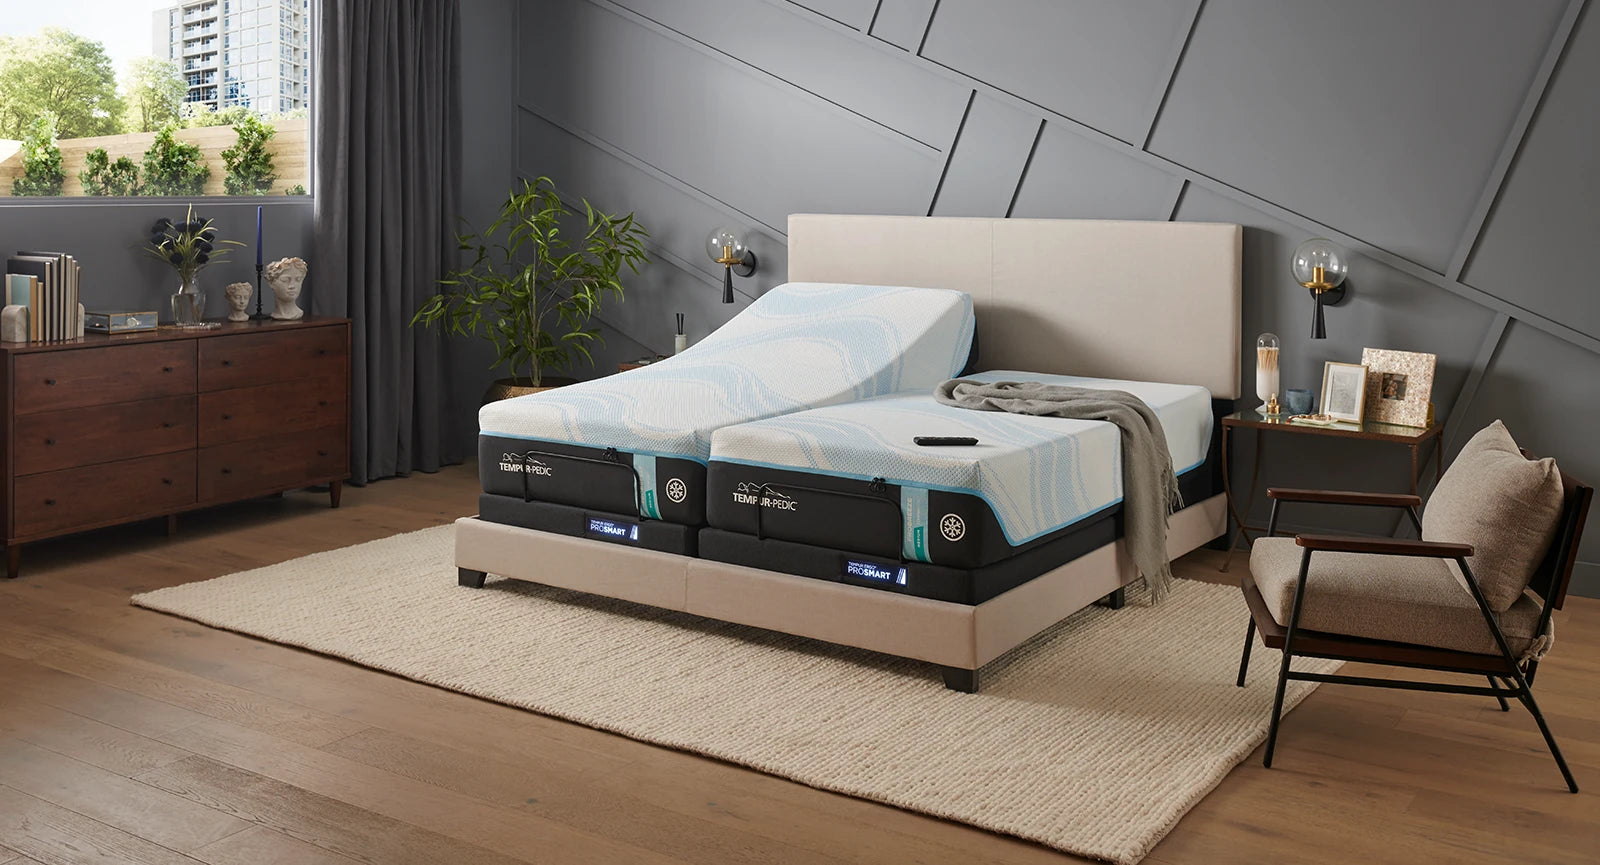 Room with a split bed and its Tempur ProSmart bases